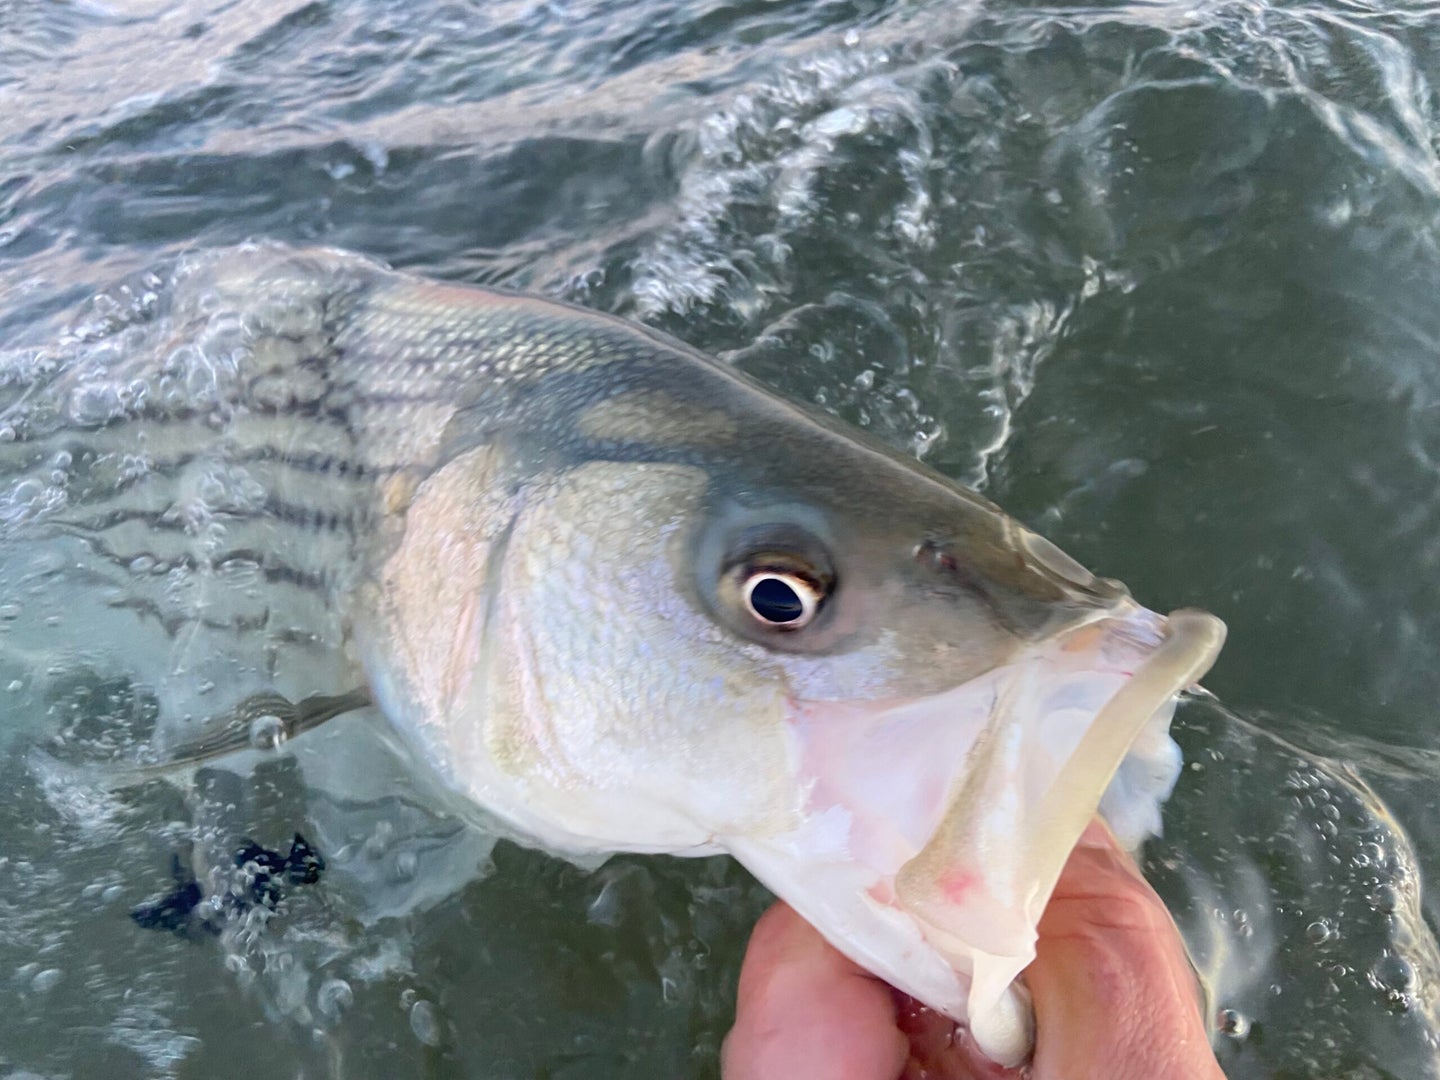 A fisherman uses his hand to grab a striped bass by the lip while surf fishing.